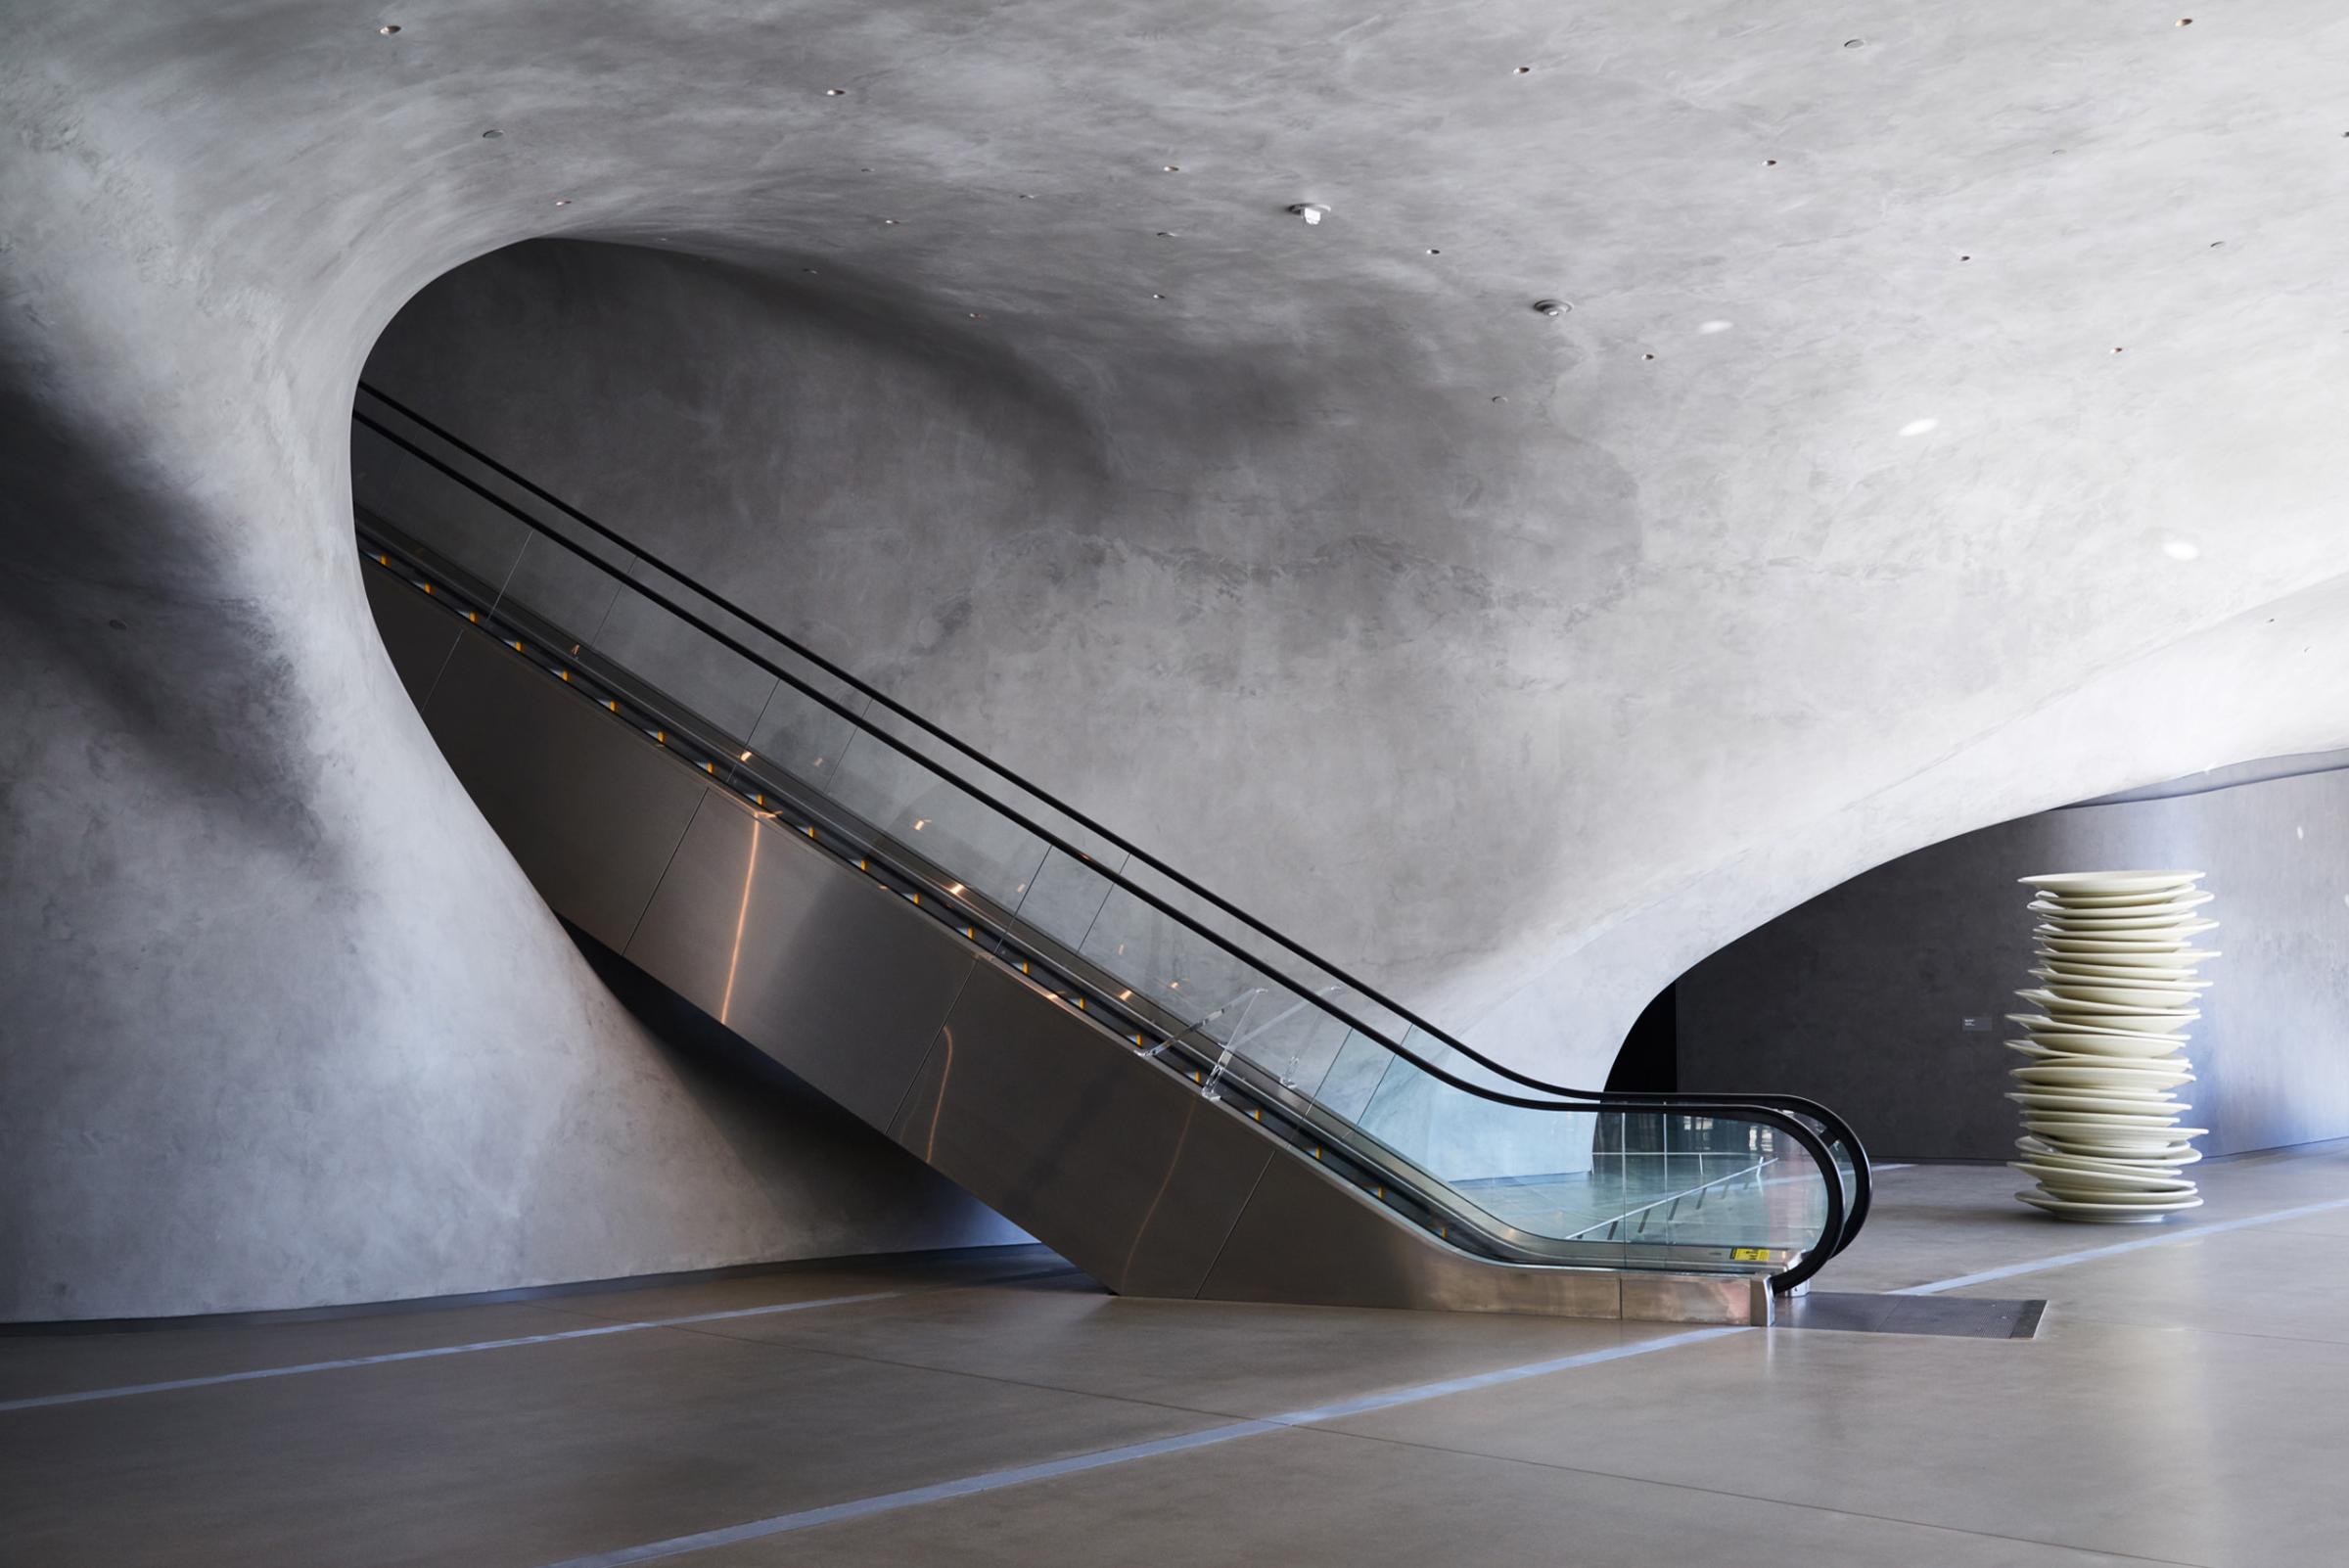 A view of the interior of The Broad Museum in Los Angeles